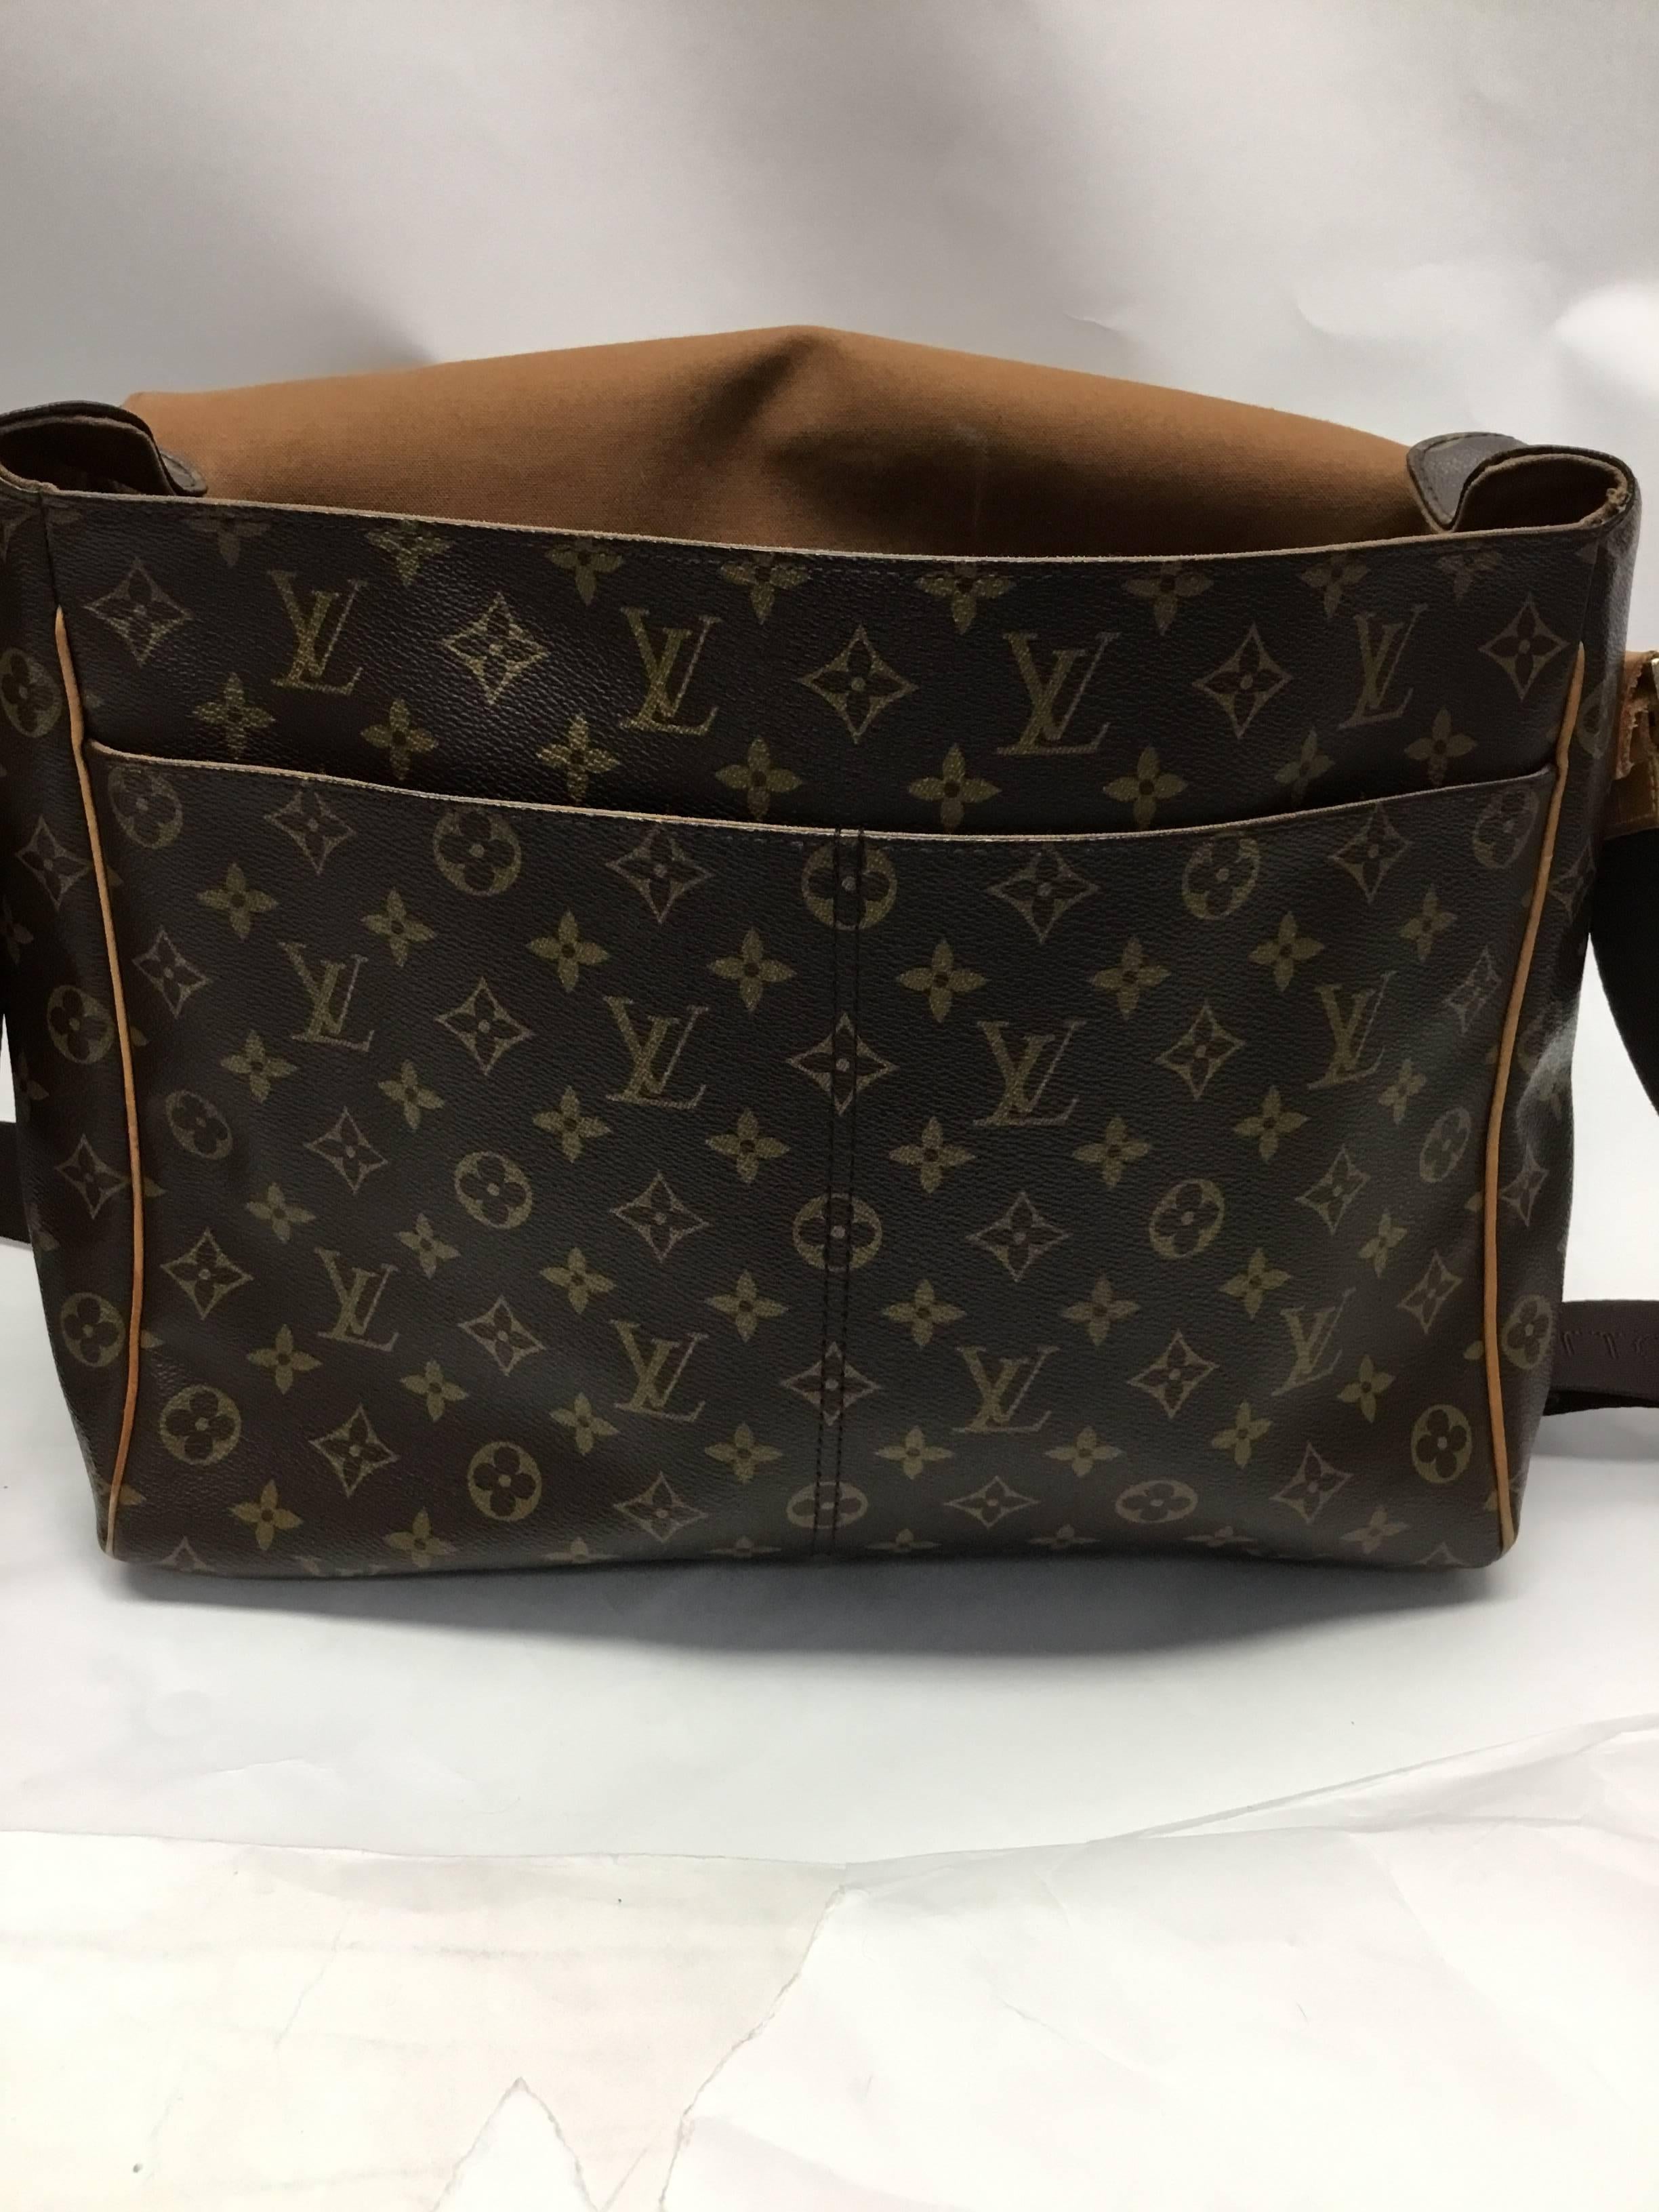 Louis Vuitton Monogram Canvas Abbesses Messenger Bag In Excellent Condition For Sale In Narberth, PA